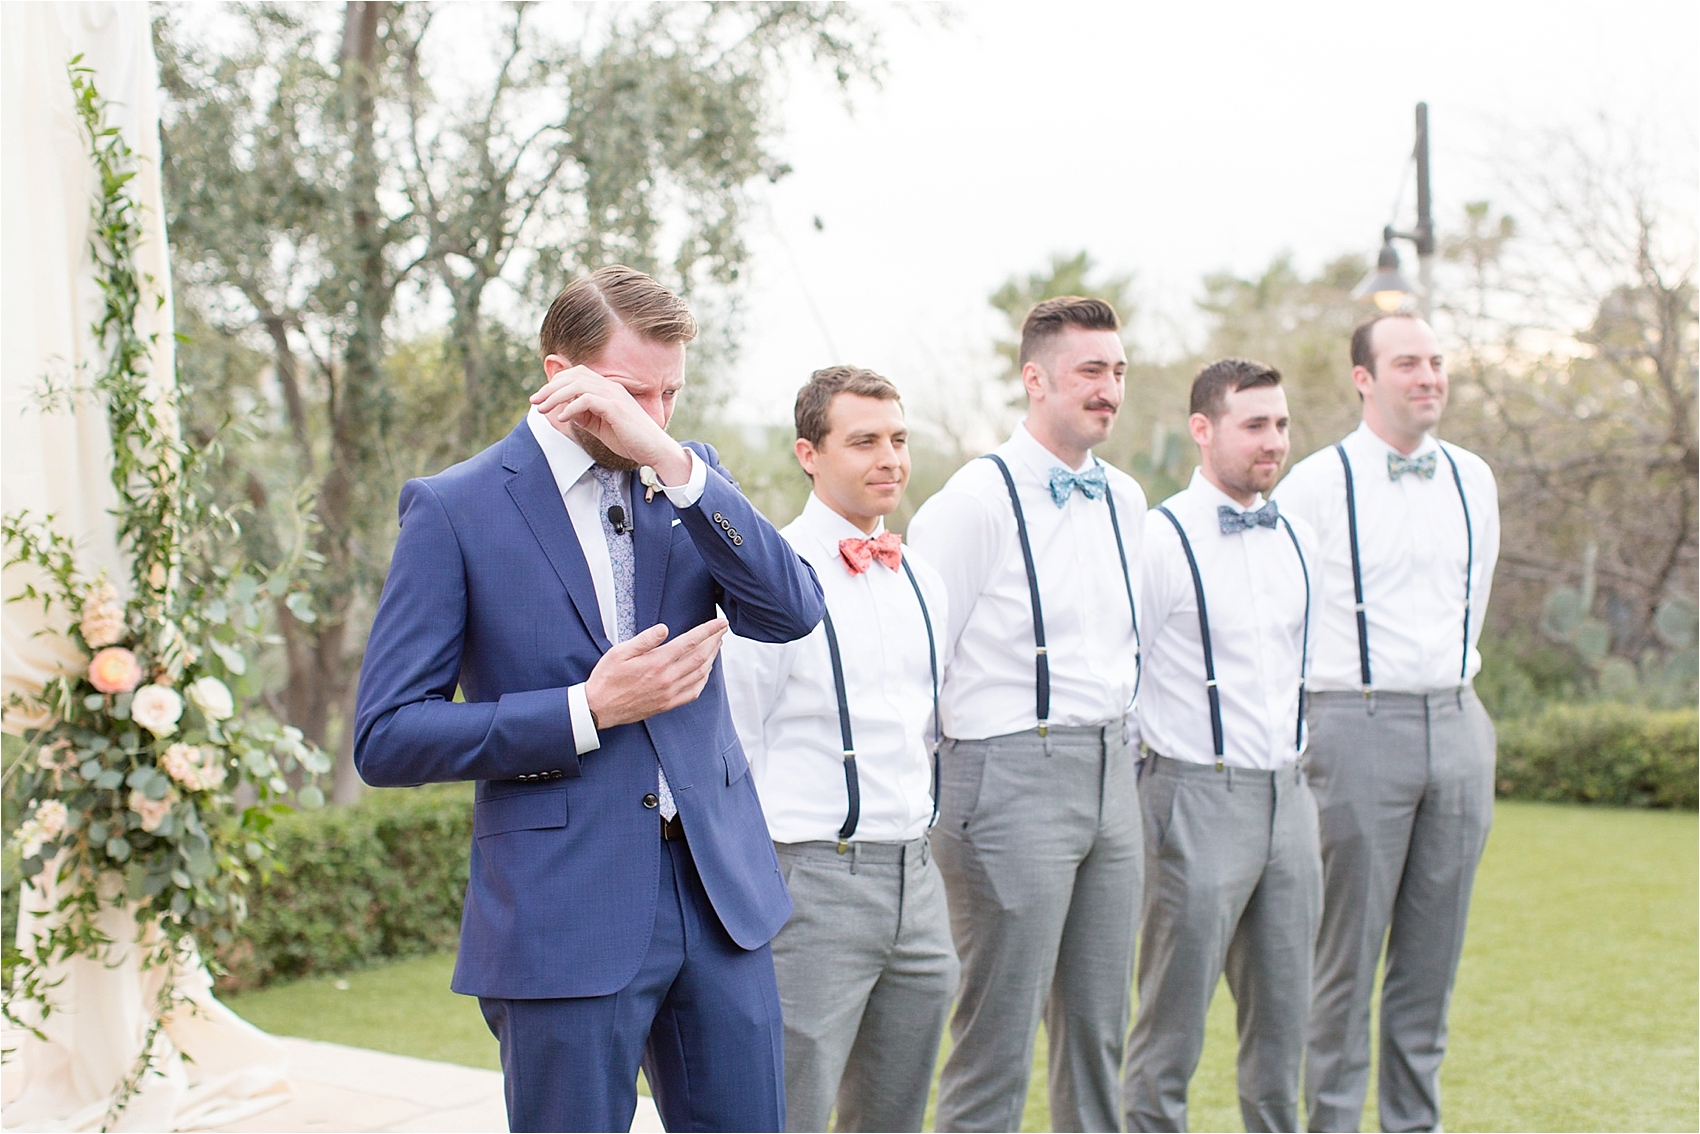 Groom's reaction when the bride comes down the aisle